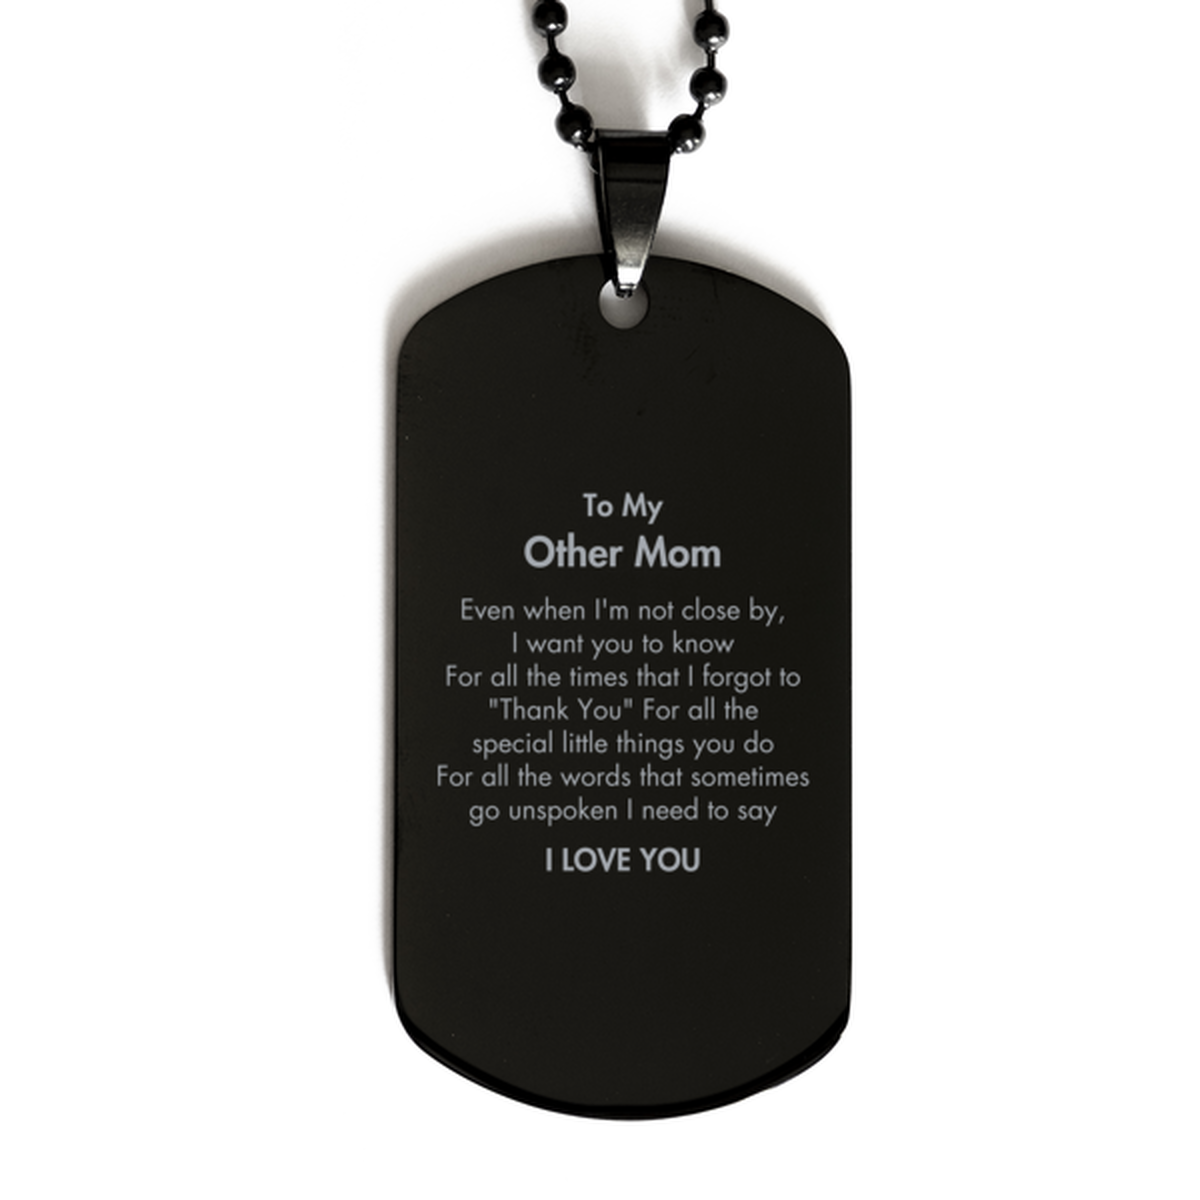 Thank You Gifts for Other Mom, Keepsake Black Dog Tag Gifts for Other Mom Birthday Mother's day Father's Day Other Mom For all the words That sometimes go unspoken I need to say I LOVE YOU